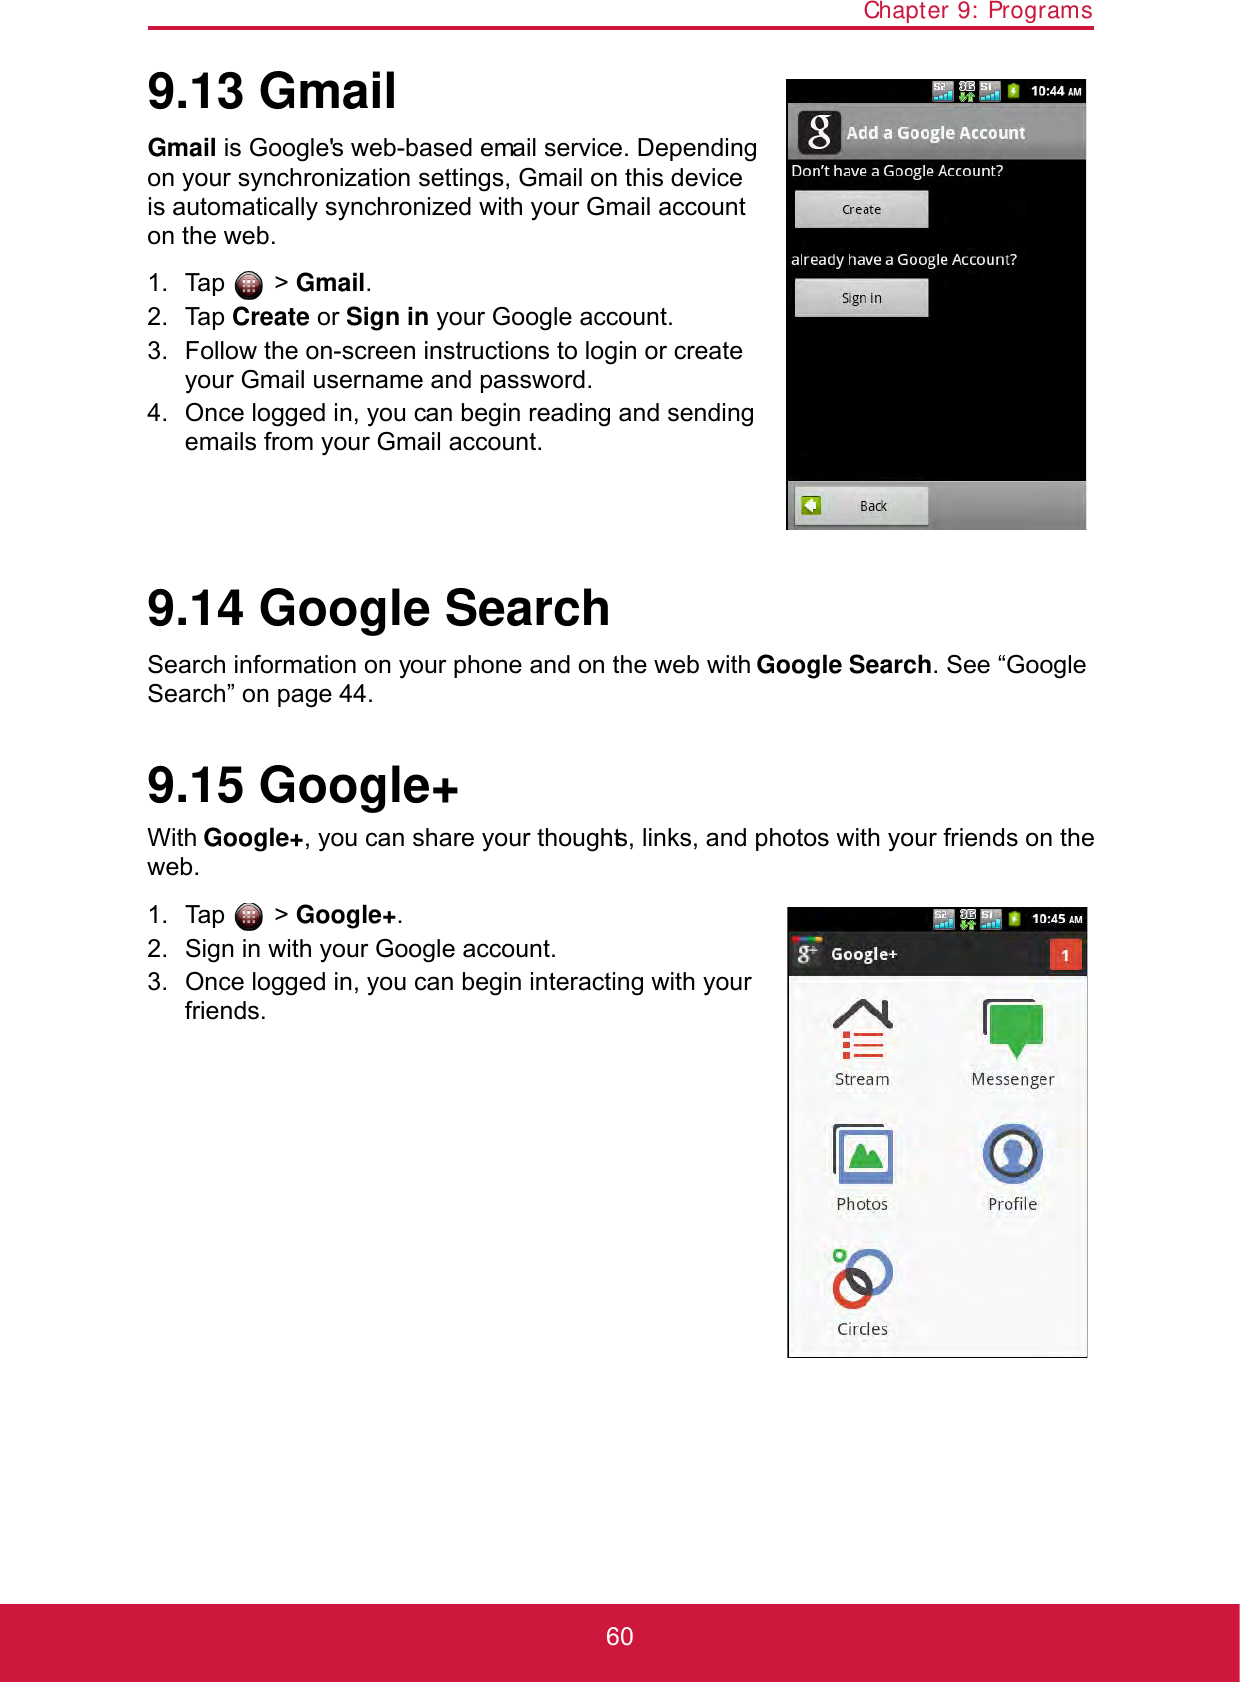 Chapter 9: Programs609.13 GmailGmail is Google&apos;s web-based email service. Depending on your synchronization settings, Gmail on this device is automatically synchronized with your Gmail account on the web.1. Tap  &gt; Gmail.2. Tap Create or Sign in your Google account.3. Follow the on-screen instructions to login or create your Gmail username and password.4. Once logged in, you can begin reading and sending emails from your Gmail account.9.14 Google SearchSearch information on your phone and on the web with Google Search. See “Google Search” on page 44.9.15 Google+With Google+, you can share your thoughts, links, and photos with your friends on the web.1. Tap  &gt; Google+.2. Sign in with your Google account.3. Once logged in, you can begin interacting with your friends. 